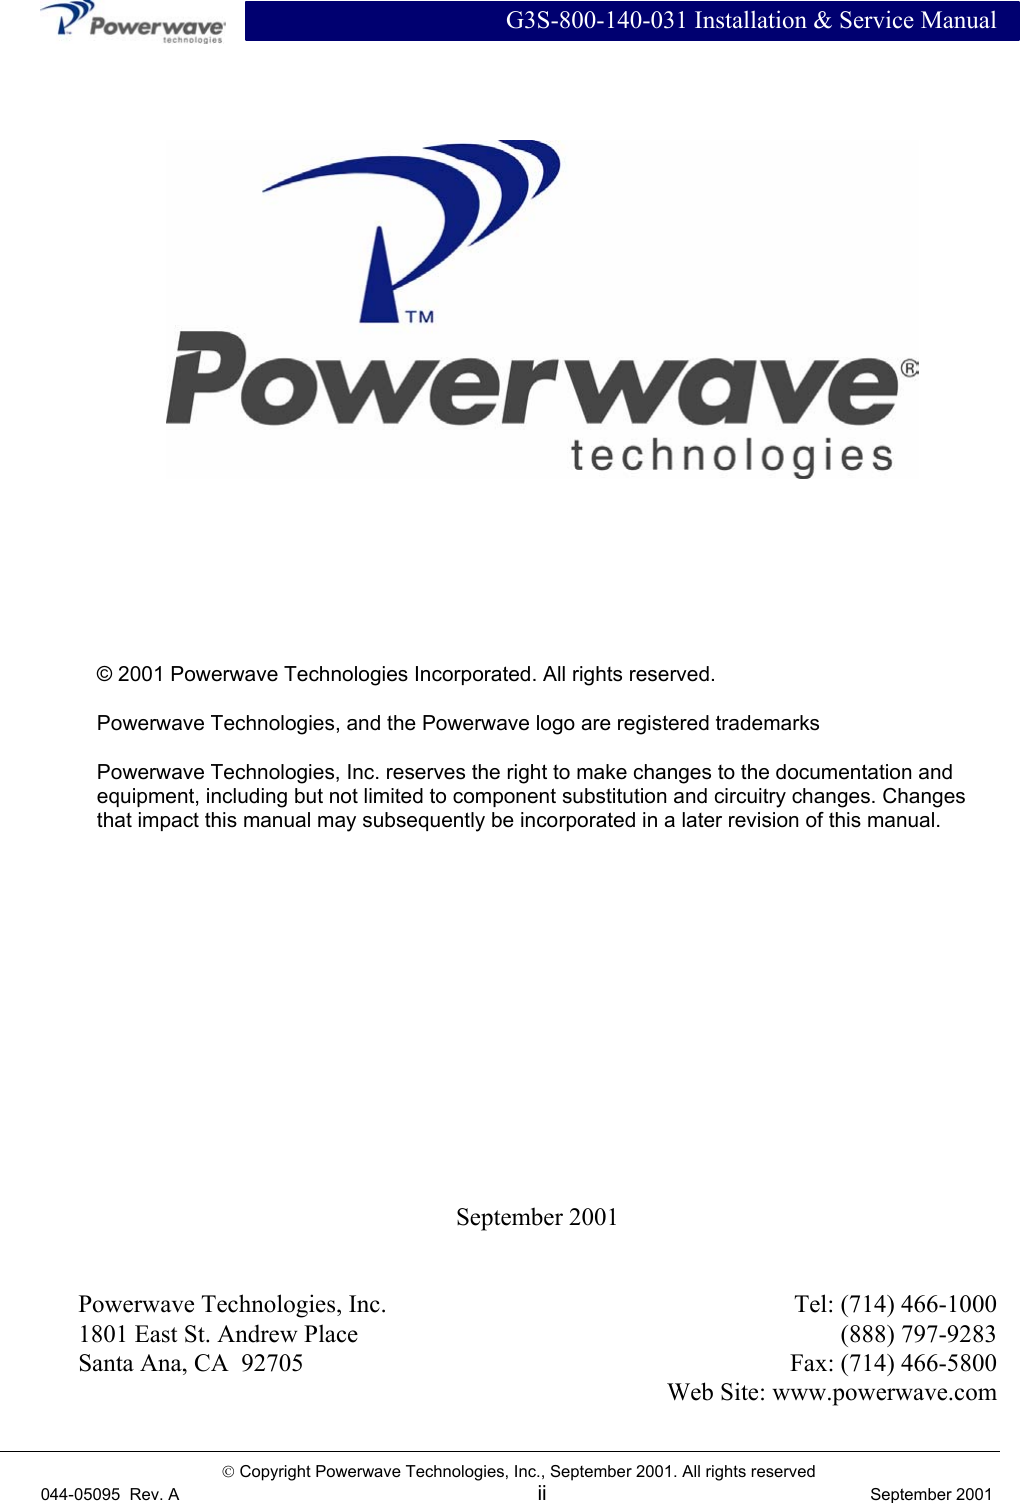  G3S-800-140-031 Installation &amp; Service Manual   Copyright Powerwave Technologies, Inc., September 2001. All rights reserved 044-05095  Rev. A ii  September 2001  September 2001   Powerwave Technologies, Inc.  Tel: (714) 466-1000 1801 East St. Andrew Place  (888) 797-9283 Santa Ana, CA  92705  Fax: (714) 466-5800   Web Site: www.powerwave.com     © 2001 Powerwave Technologies Incorporated. All rights reserved. Powerwave Technologies, and the Powerwave logo are registered trademarks Powerwave Technologies, Inc. reserves the right to make changes to the documentation and equipment, including but not limited to component substitution and circuitry changes. Changes that impact this manual may subsequently be incorporated in a later revision of this manual. 